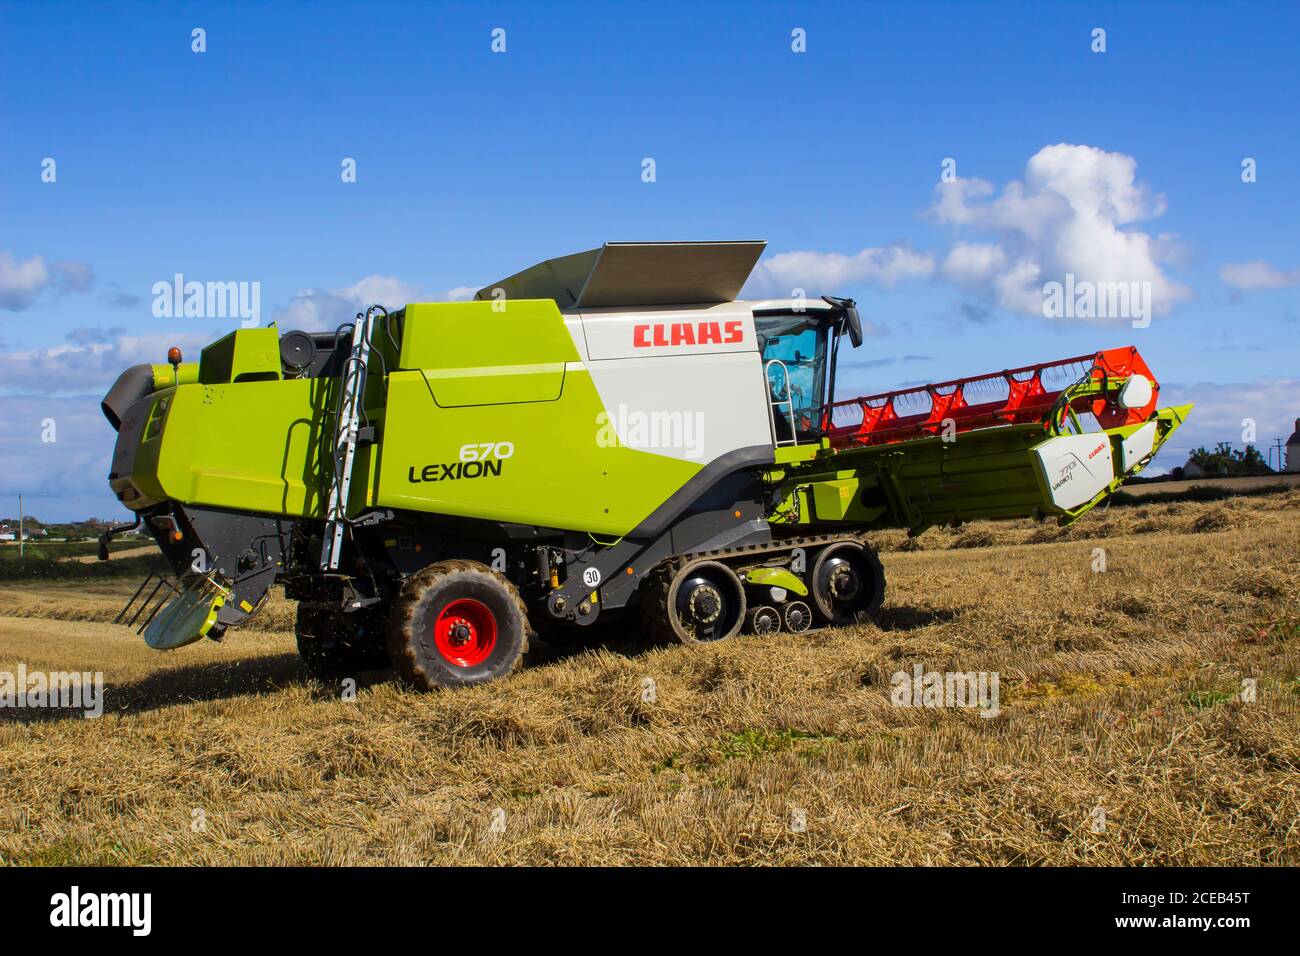 31 August 2020 A Cllas Lexion 570 Combine Harvester at work in a small field of barley corn in Bangor County Down Northern Ireland Stock Photo